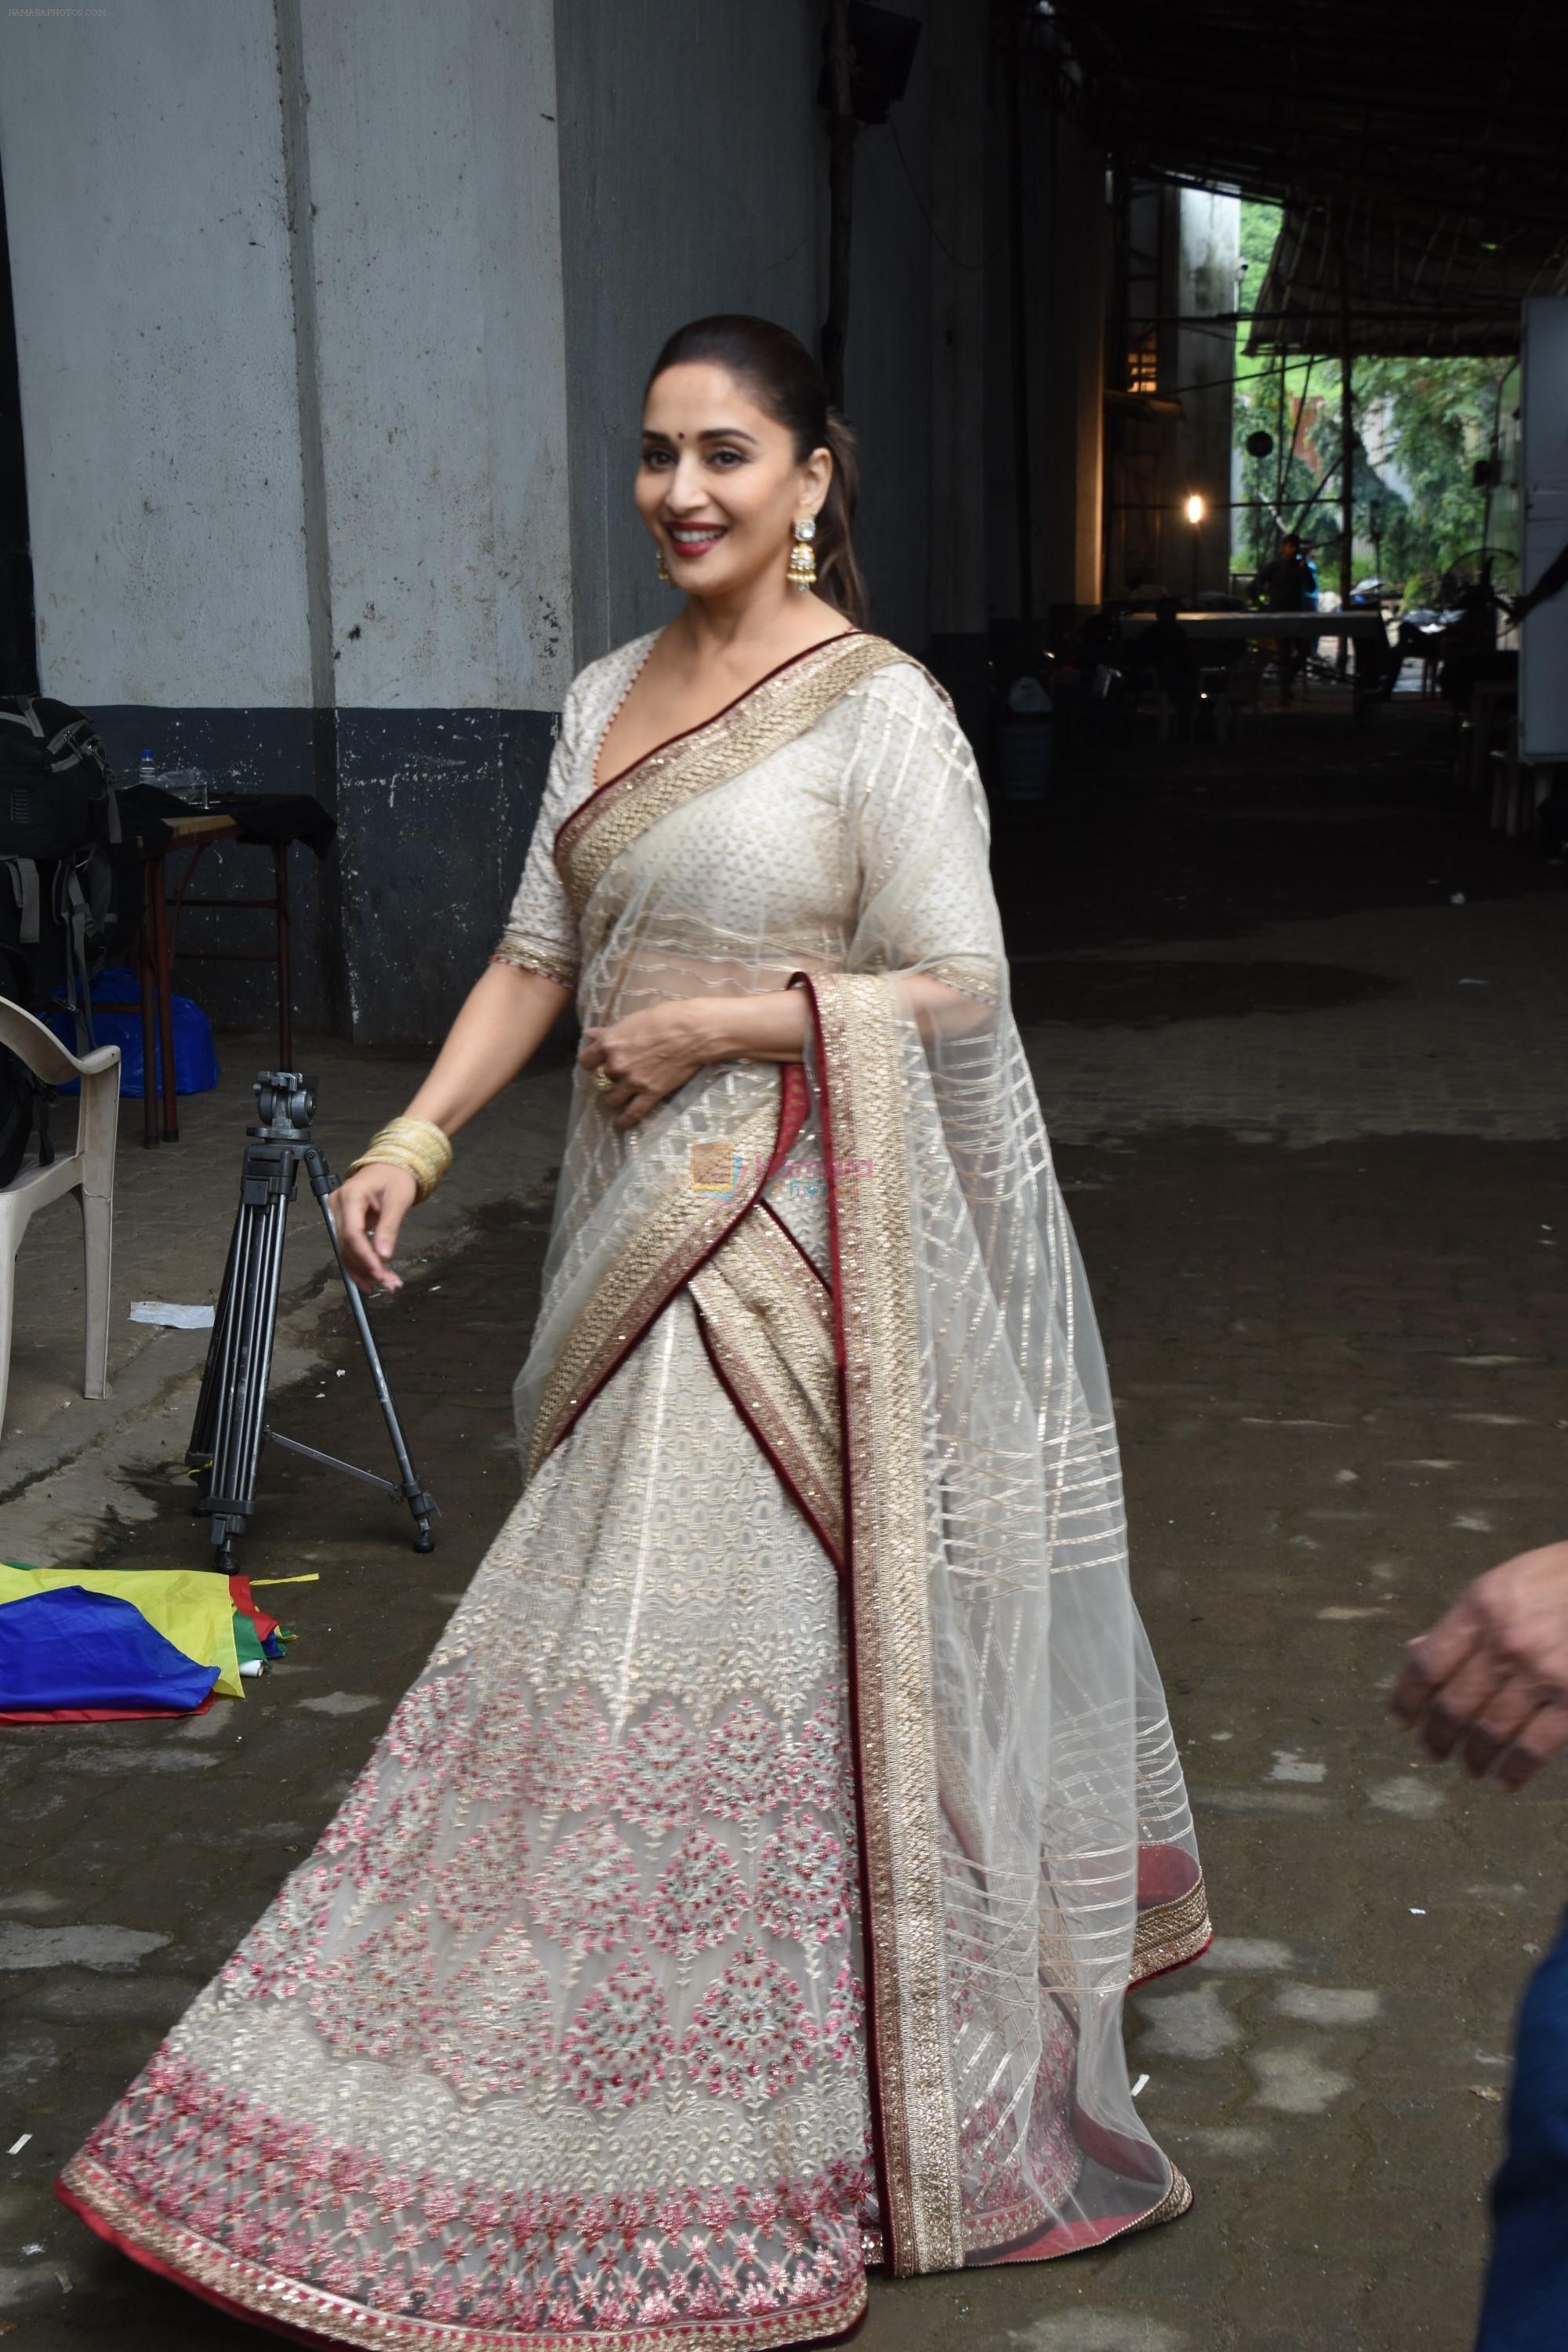 Madhuri Dixit on the the sets of Colors Dance Deewane in filmcity on 20th Aug 2018